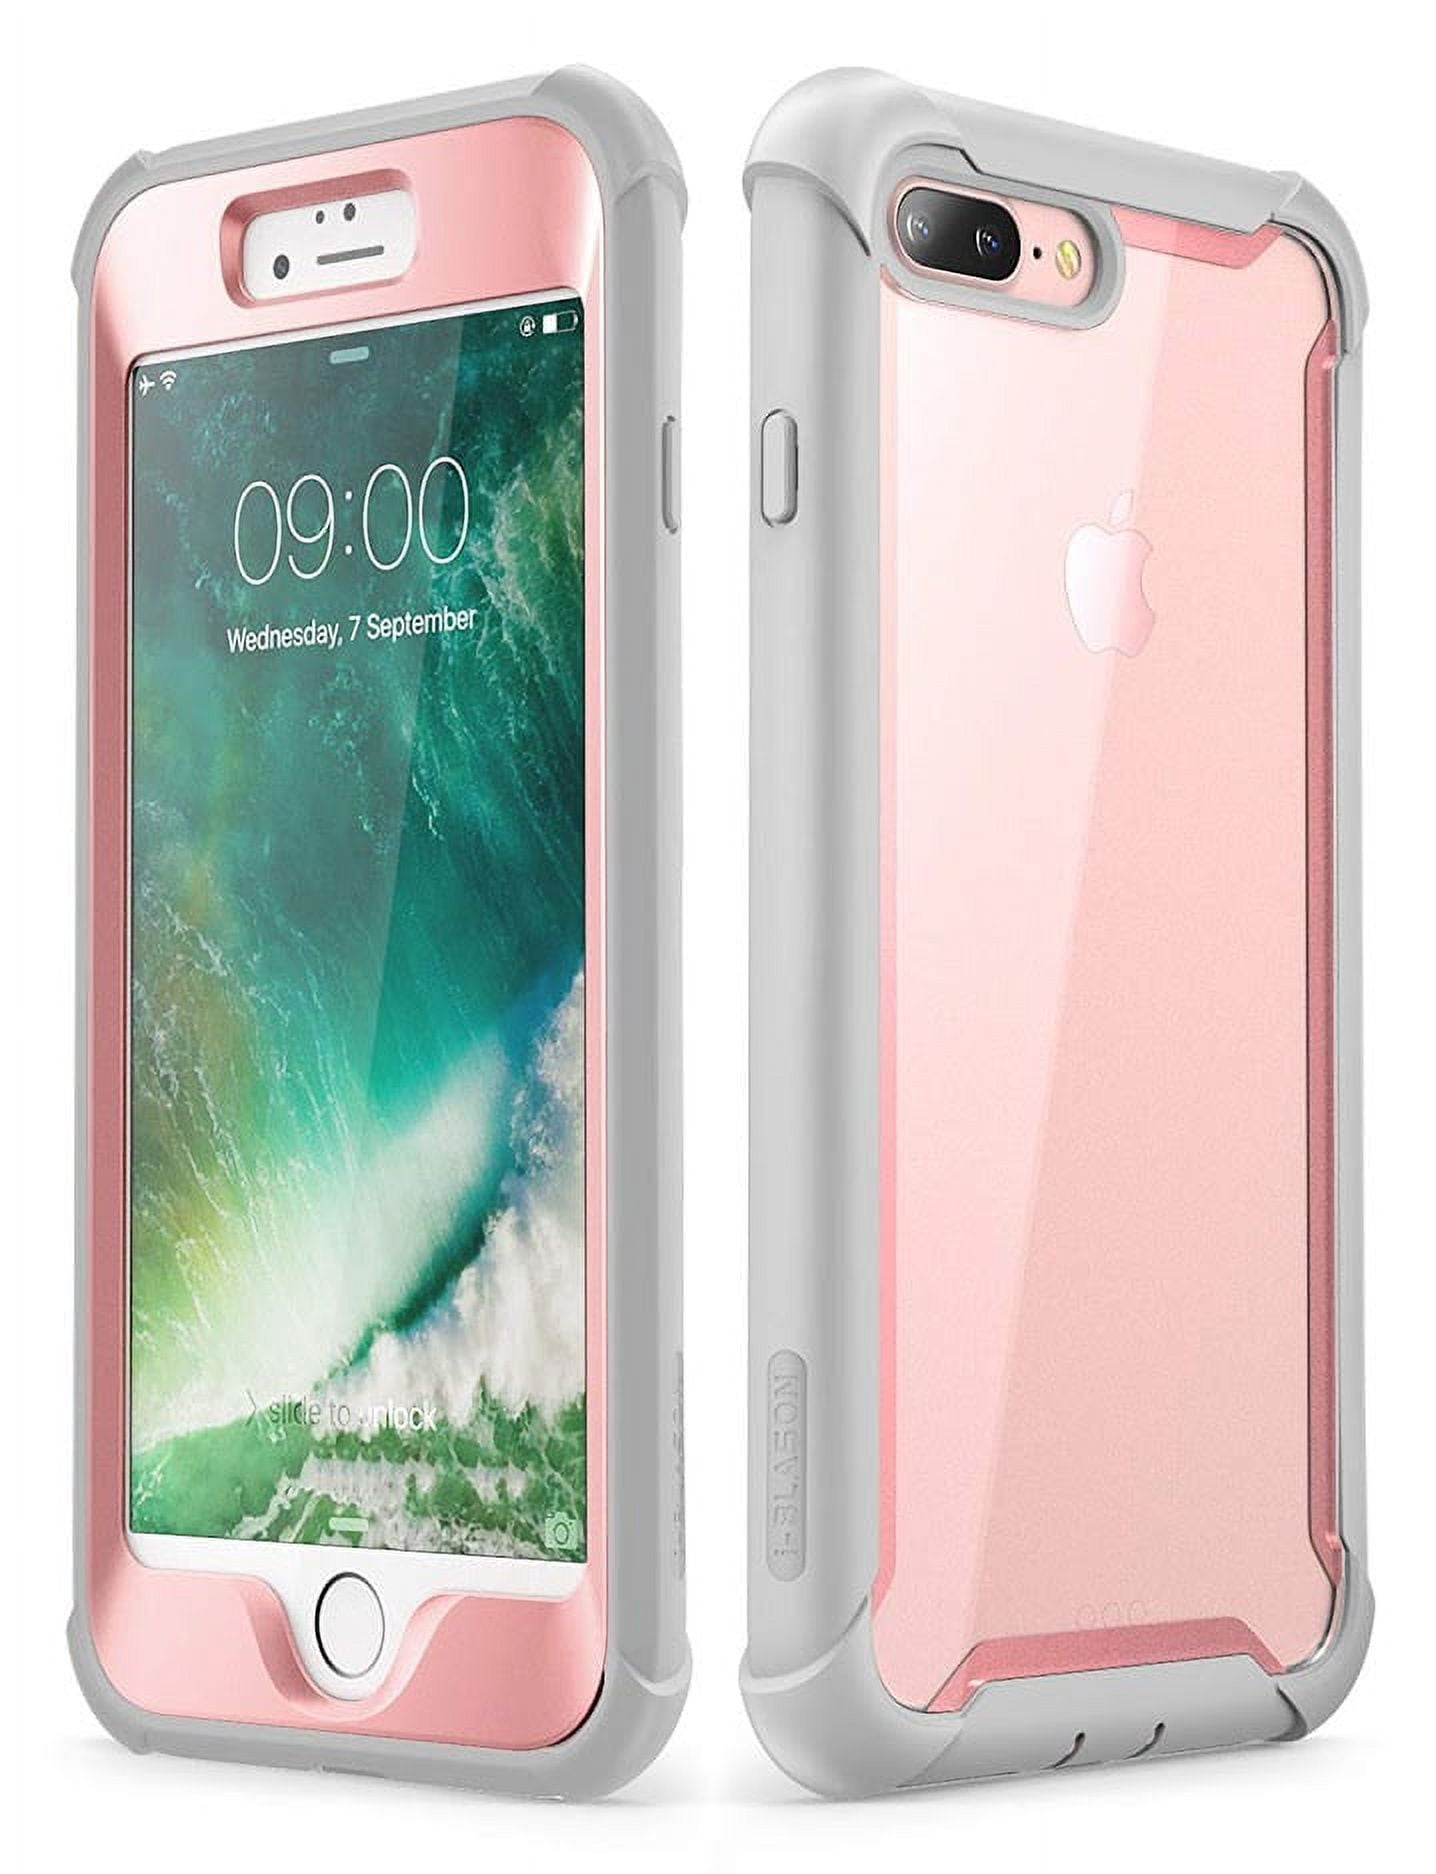 iPhone 8 Plus case, iPhone 7 Plus case, i-Blason [Ares] Full-Body Rugged  Clear Bumper Case with Built-in Screen Protector for Apple iPhone 8  Plus/Apple iPhone 7 Plus (Pink) 